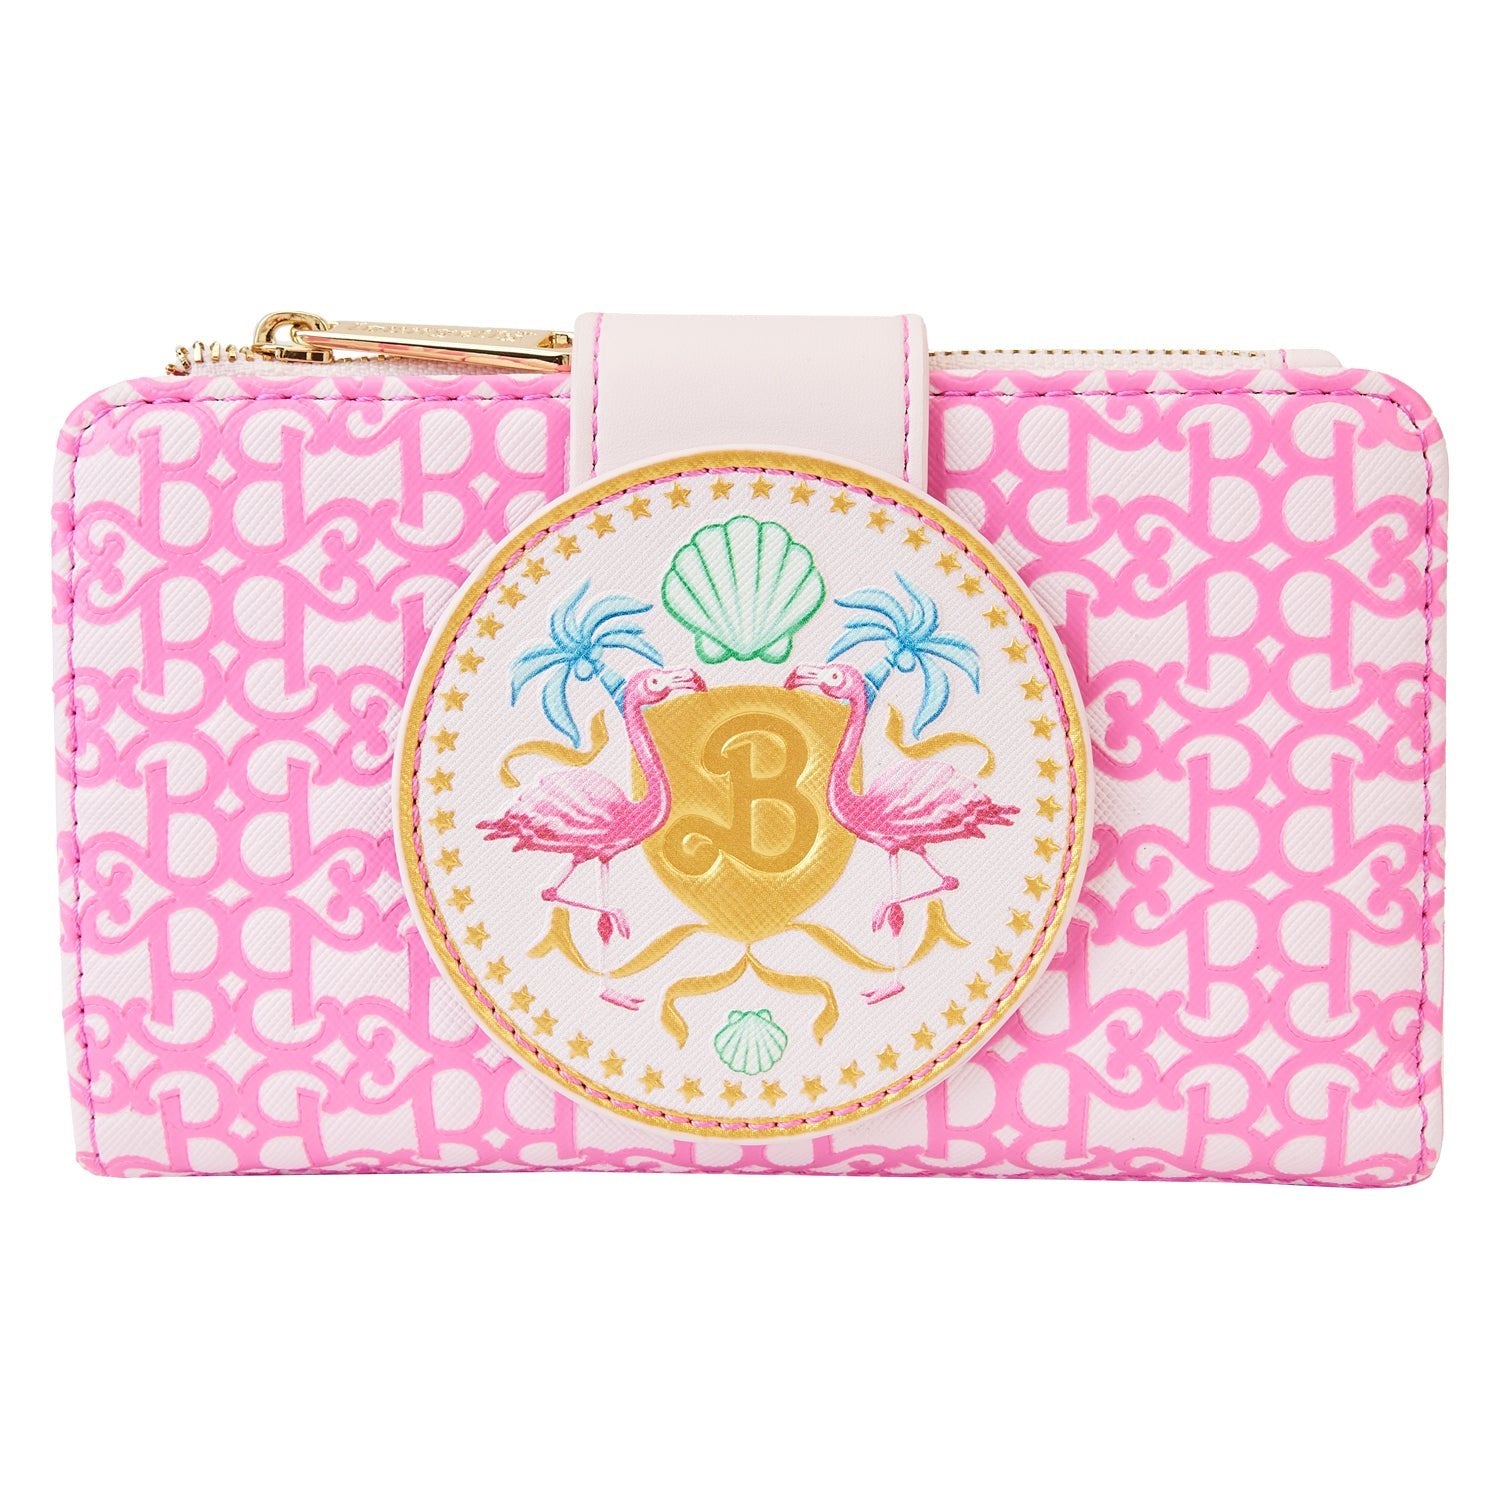 Loungefly x Barbie The Movie Purse - GeekCore